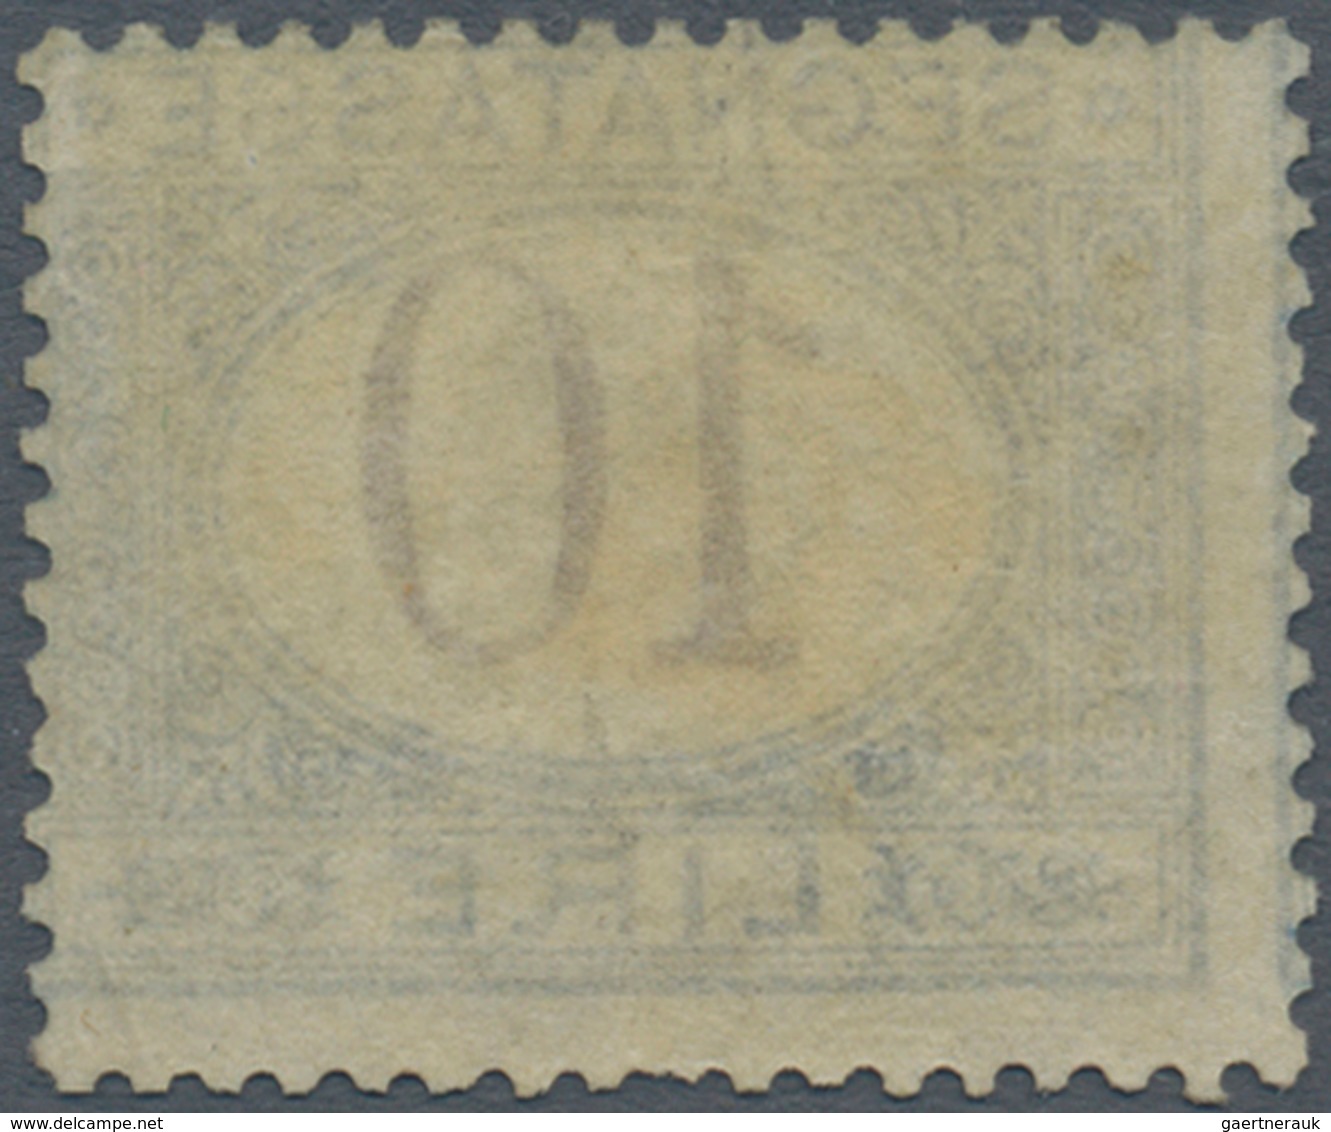 01008 Italien - Portomarken: 1874, 10 Lire Blue And Brown, Mint With Gum, Fine Condition. Certificate Rayb - Strafport